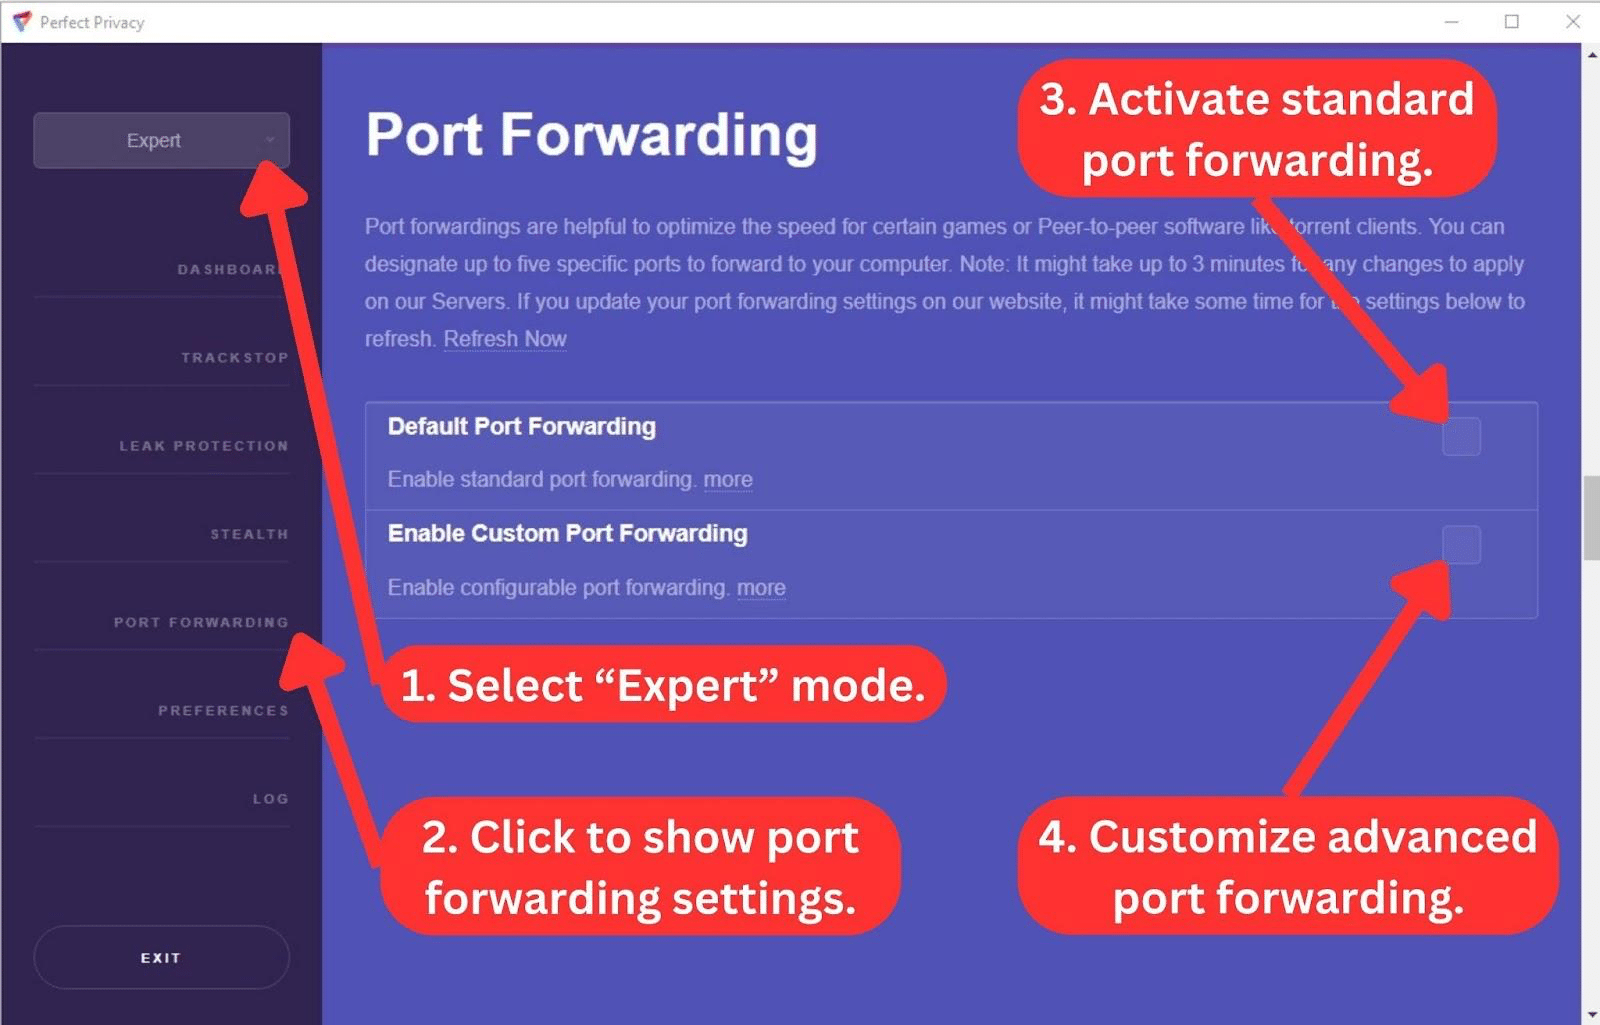 How to enable Perfect Privacy's port forwarding feature on Windows